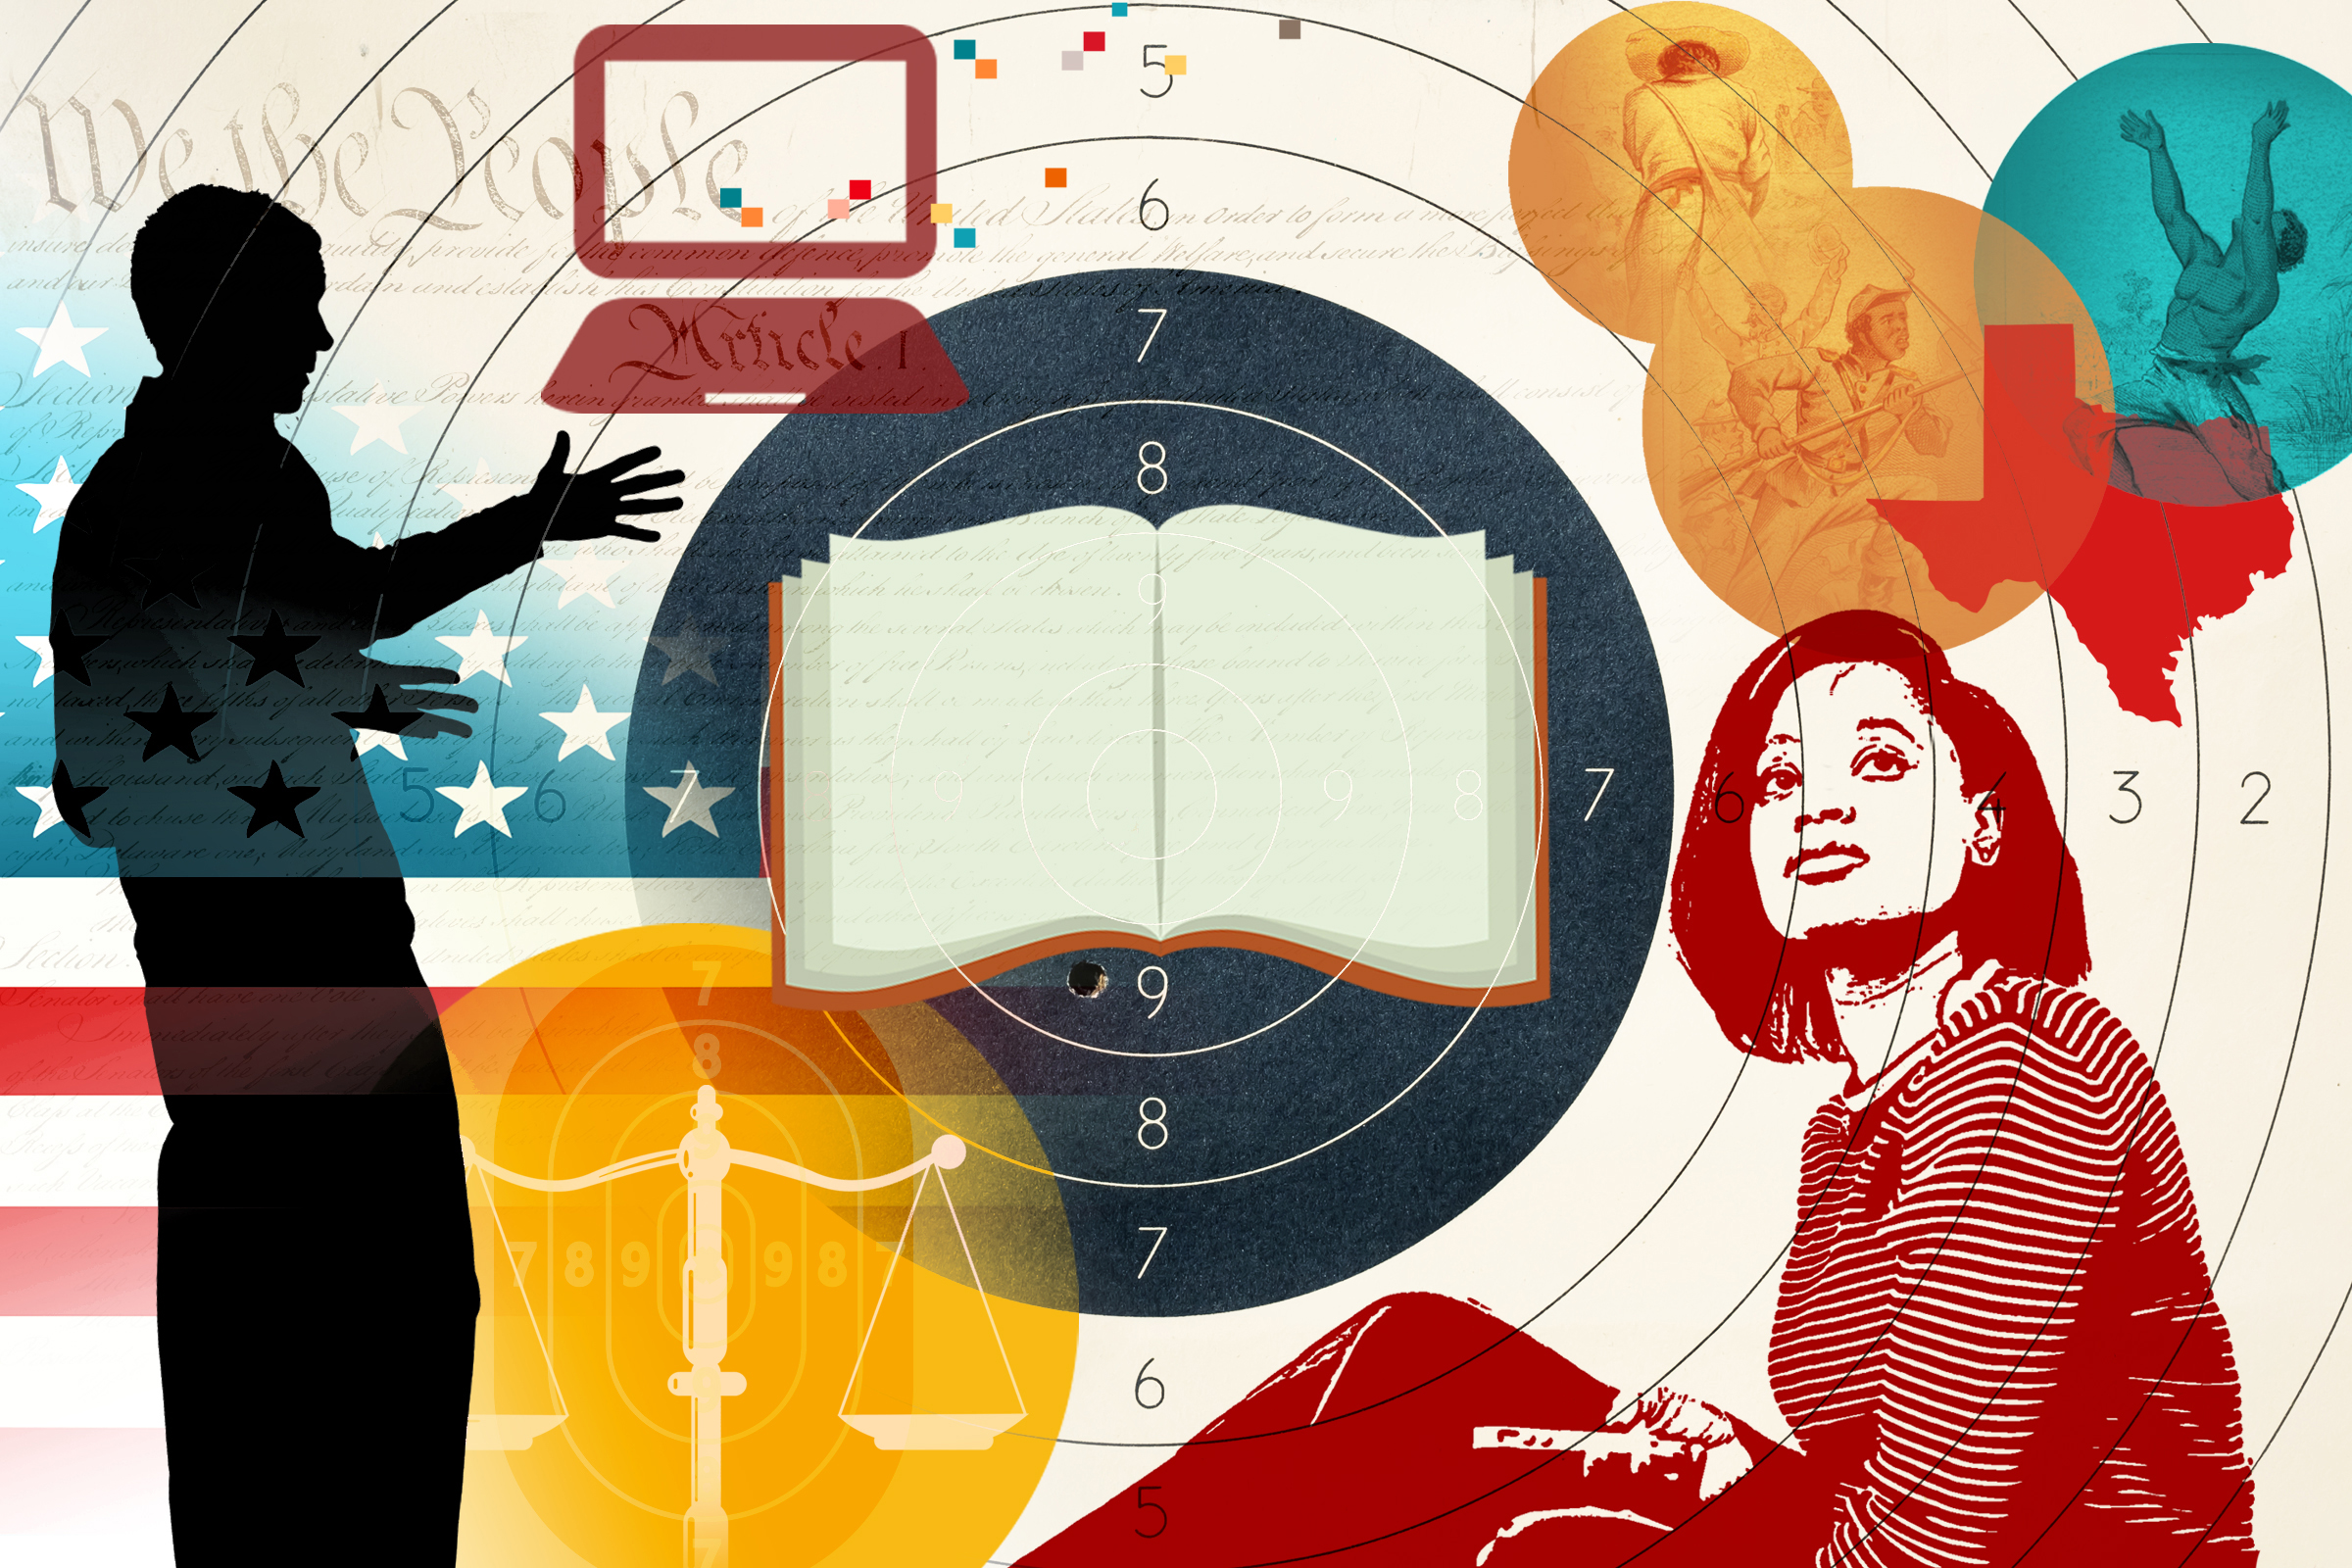 One year after the peak of the backlash, teachers say there has been a chilling effect on teaching issues related to race and racism. (Illustration by Stephanie Dalton Cowan for TIME)